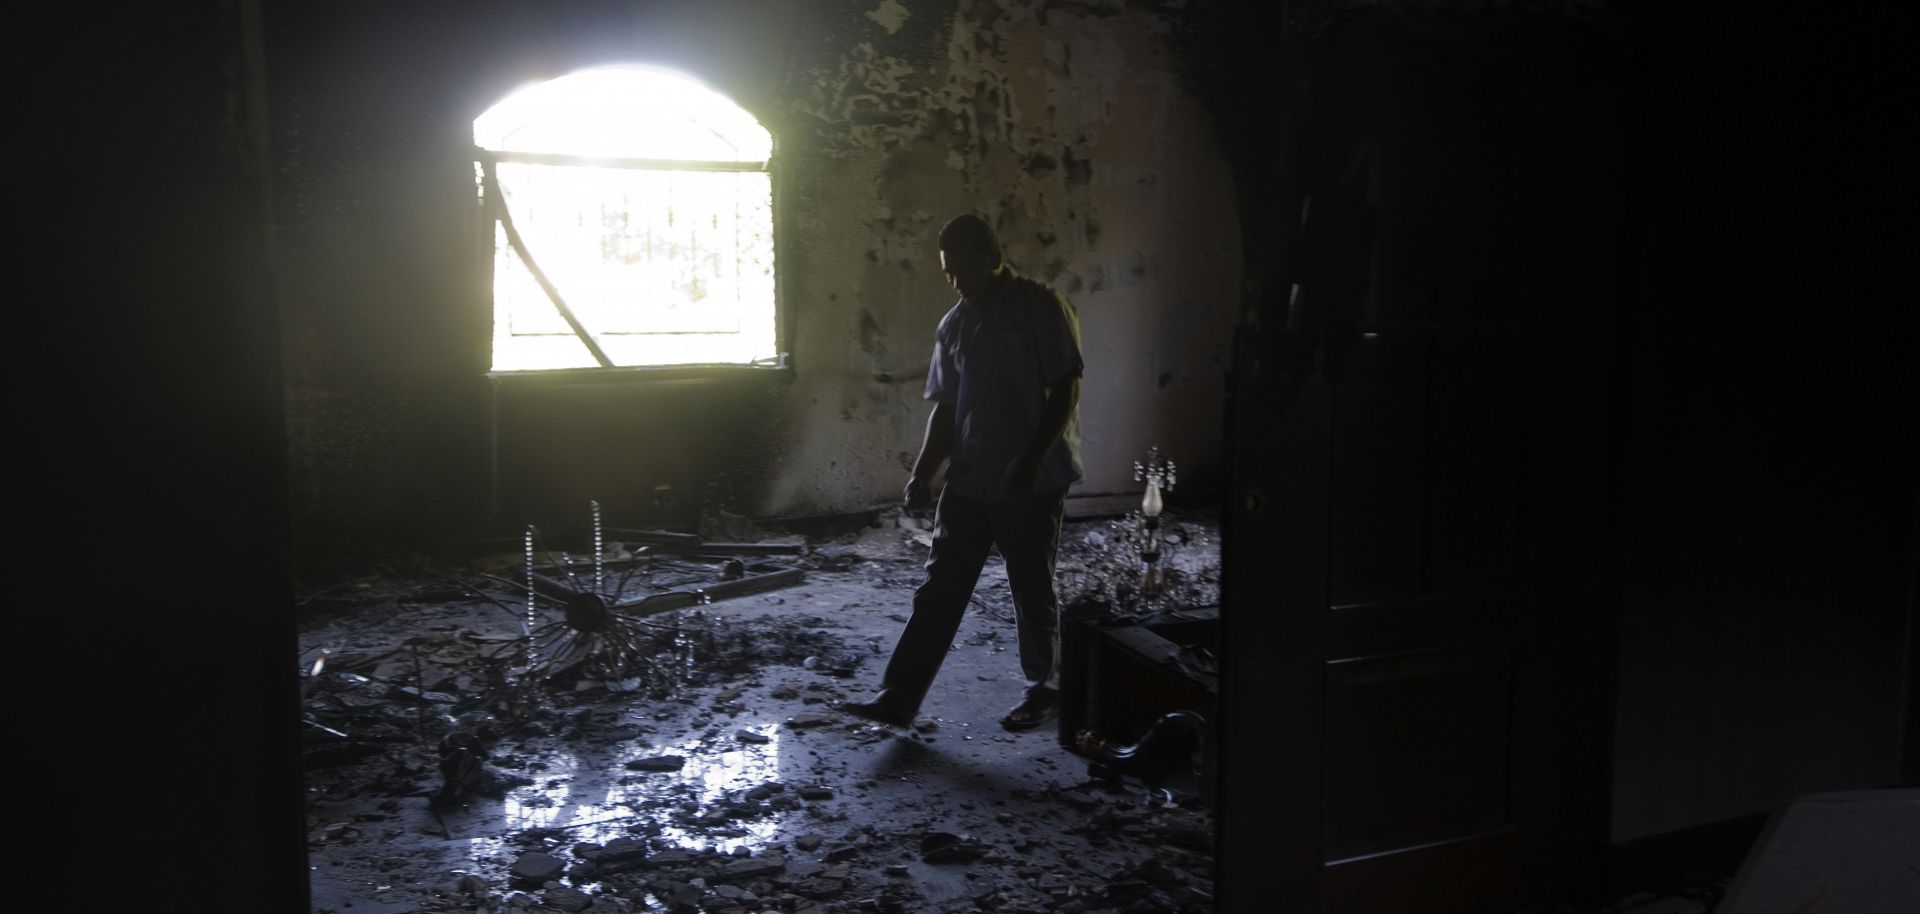 A Libyan man walks through the debris of the damaged US ambassador's residence in the US consulate compound in Benghazi on September 13, 2012, following an attack on the building late on September 11 in which the US ambassador to Libya and three other US nationals were killed.